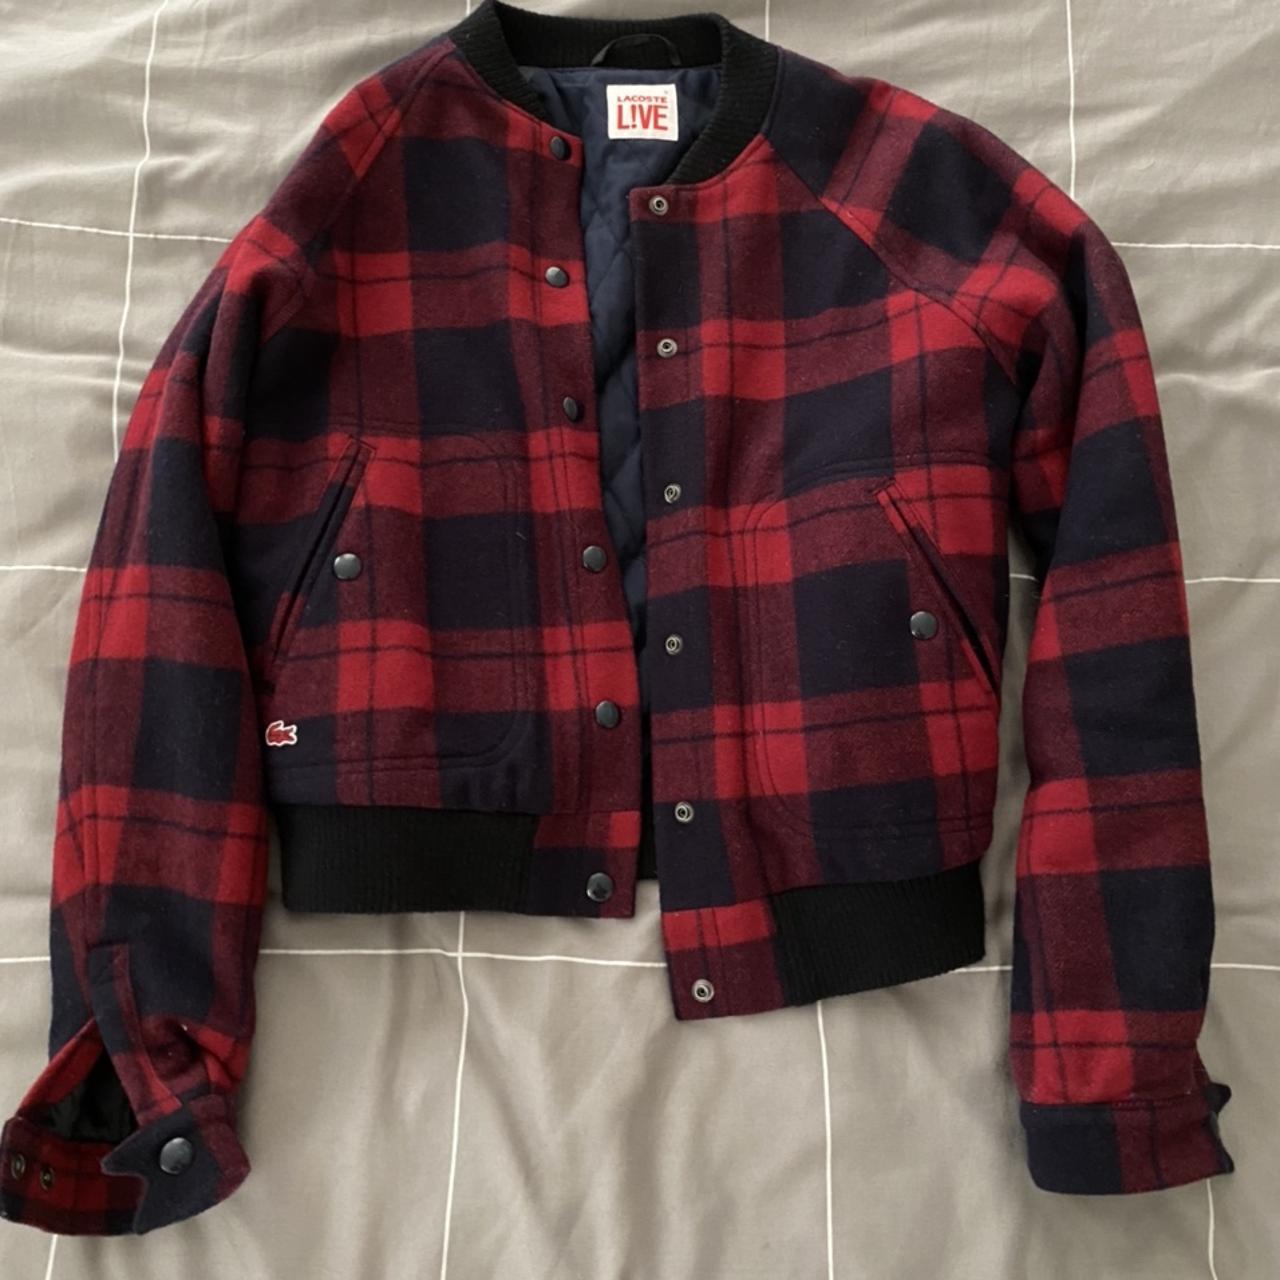 Lacoste Red and Navy Jacket | Depop